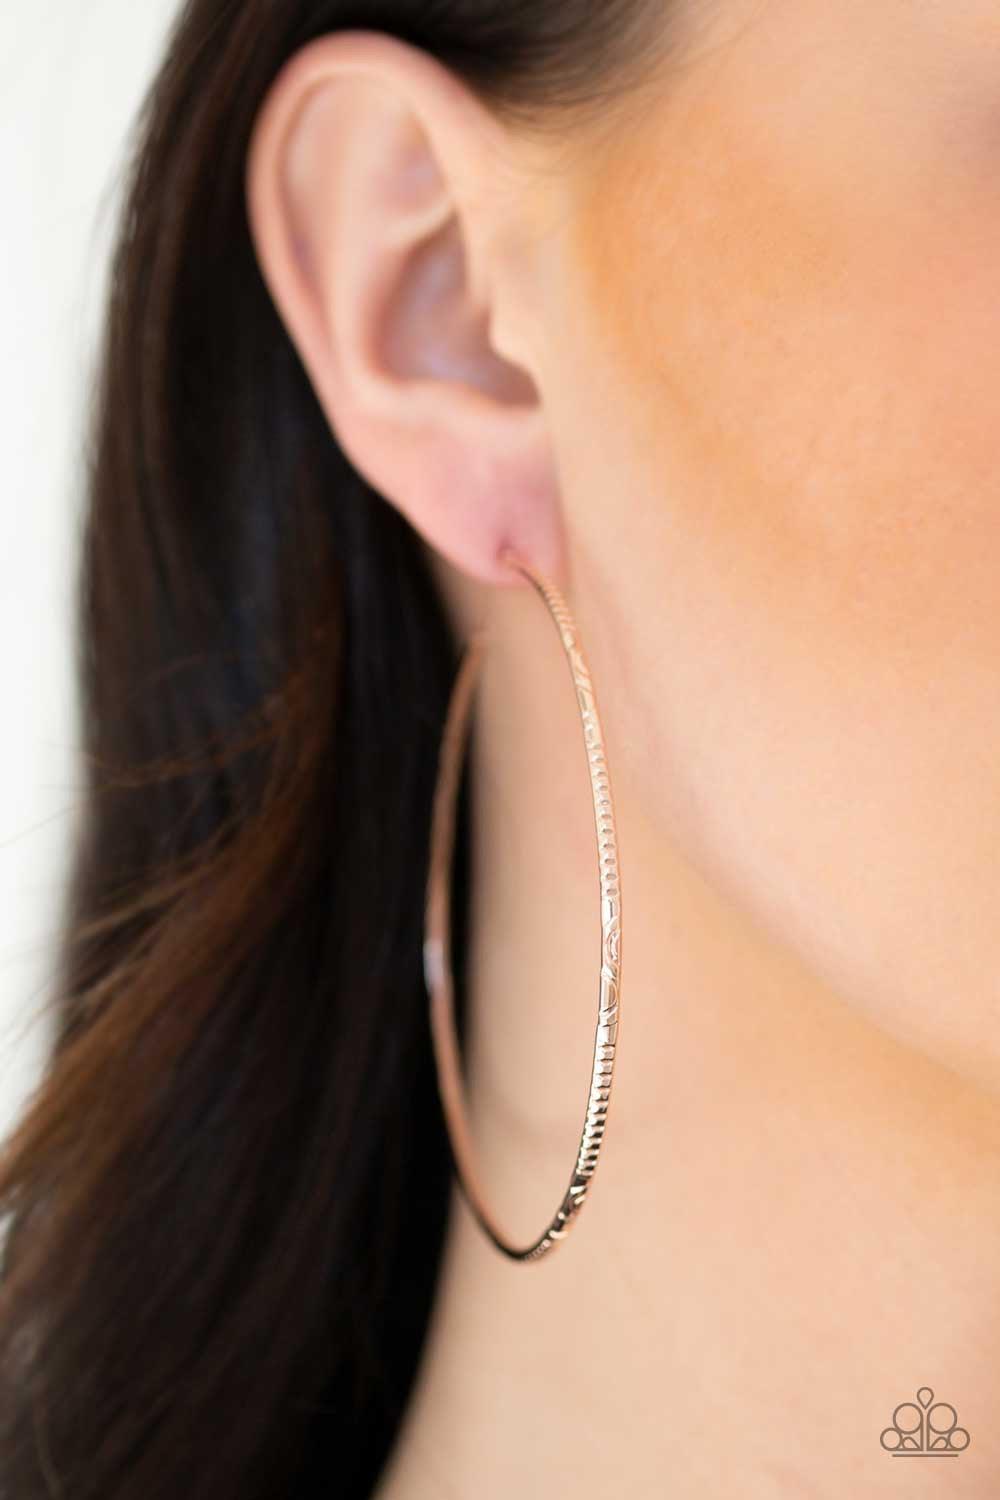 Paparazzi Accessories Sleek Fleek - Rose Gold Etched in mismatched textures, a dainty rose gold bar curls into a patterned hoop for a seasonal look. Earring attaches to a standard post fitting. Hoop measures 2 3/4" in diameter. Jewelry